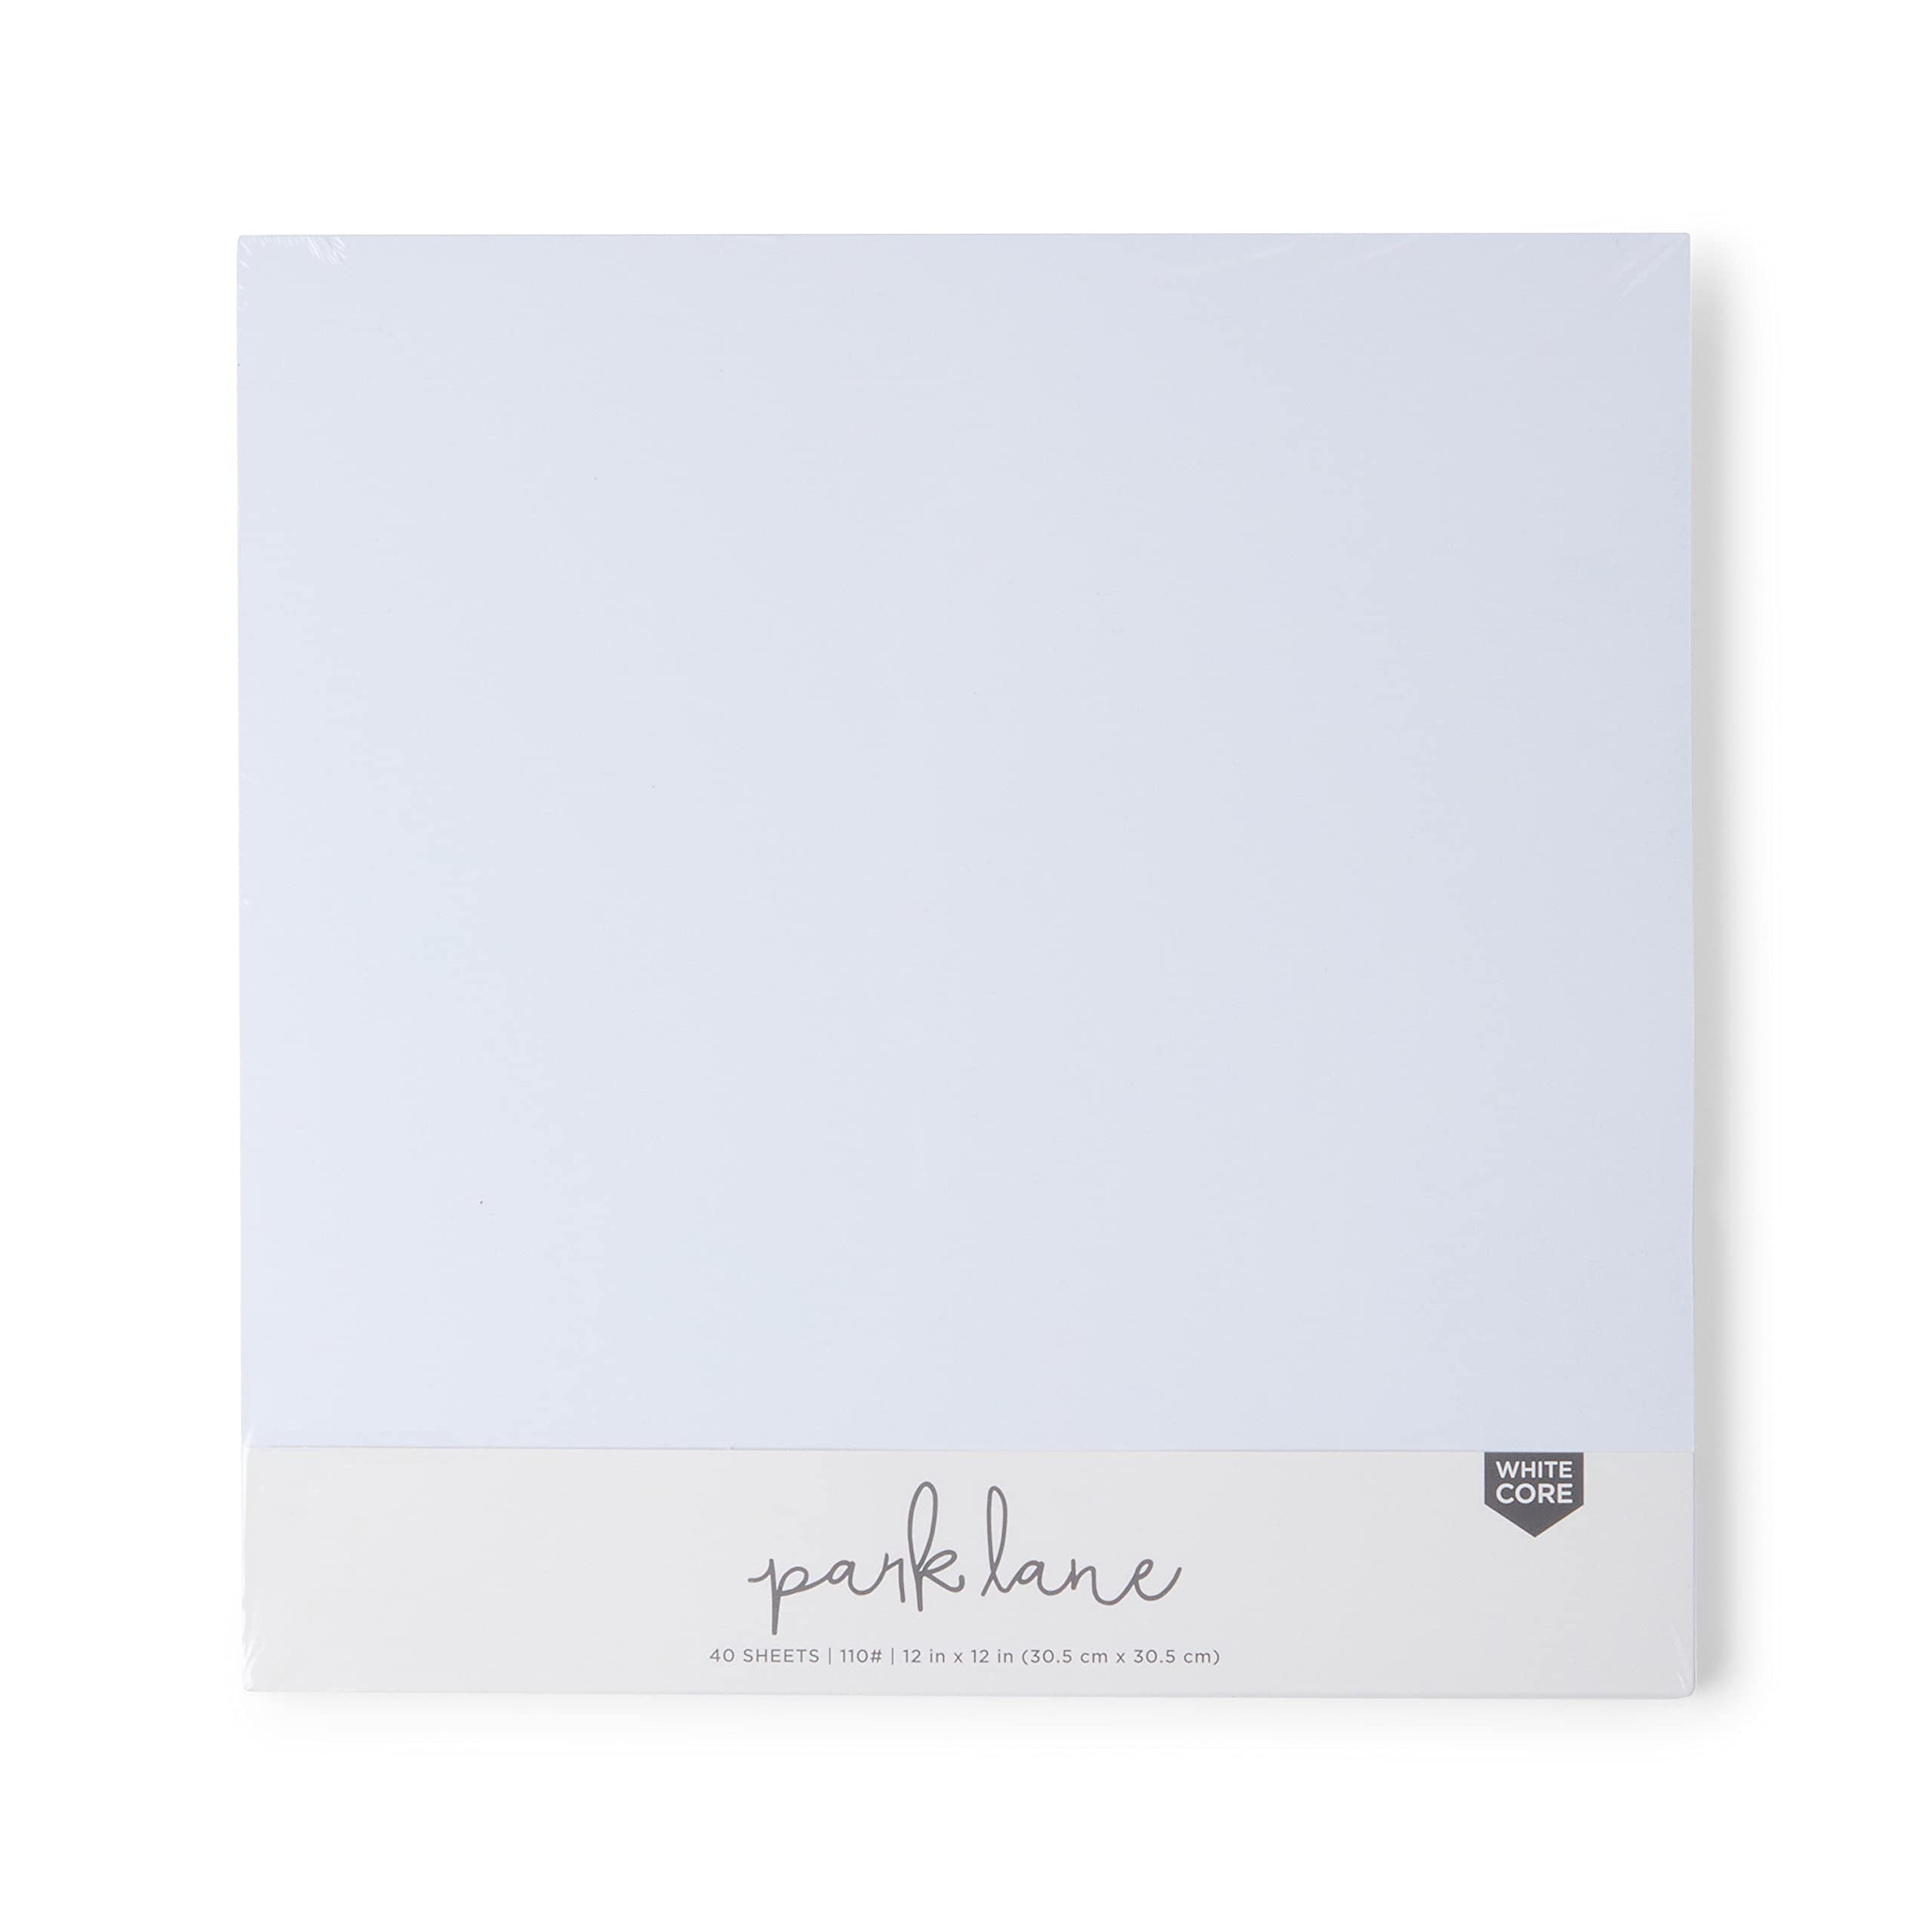 25 Sheets, White Cardstock Paper Heavyweight - 110 lb. Cover, 12 x 12